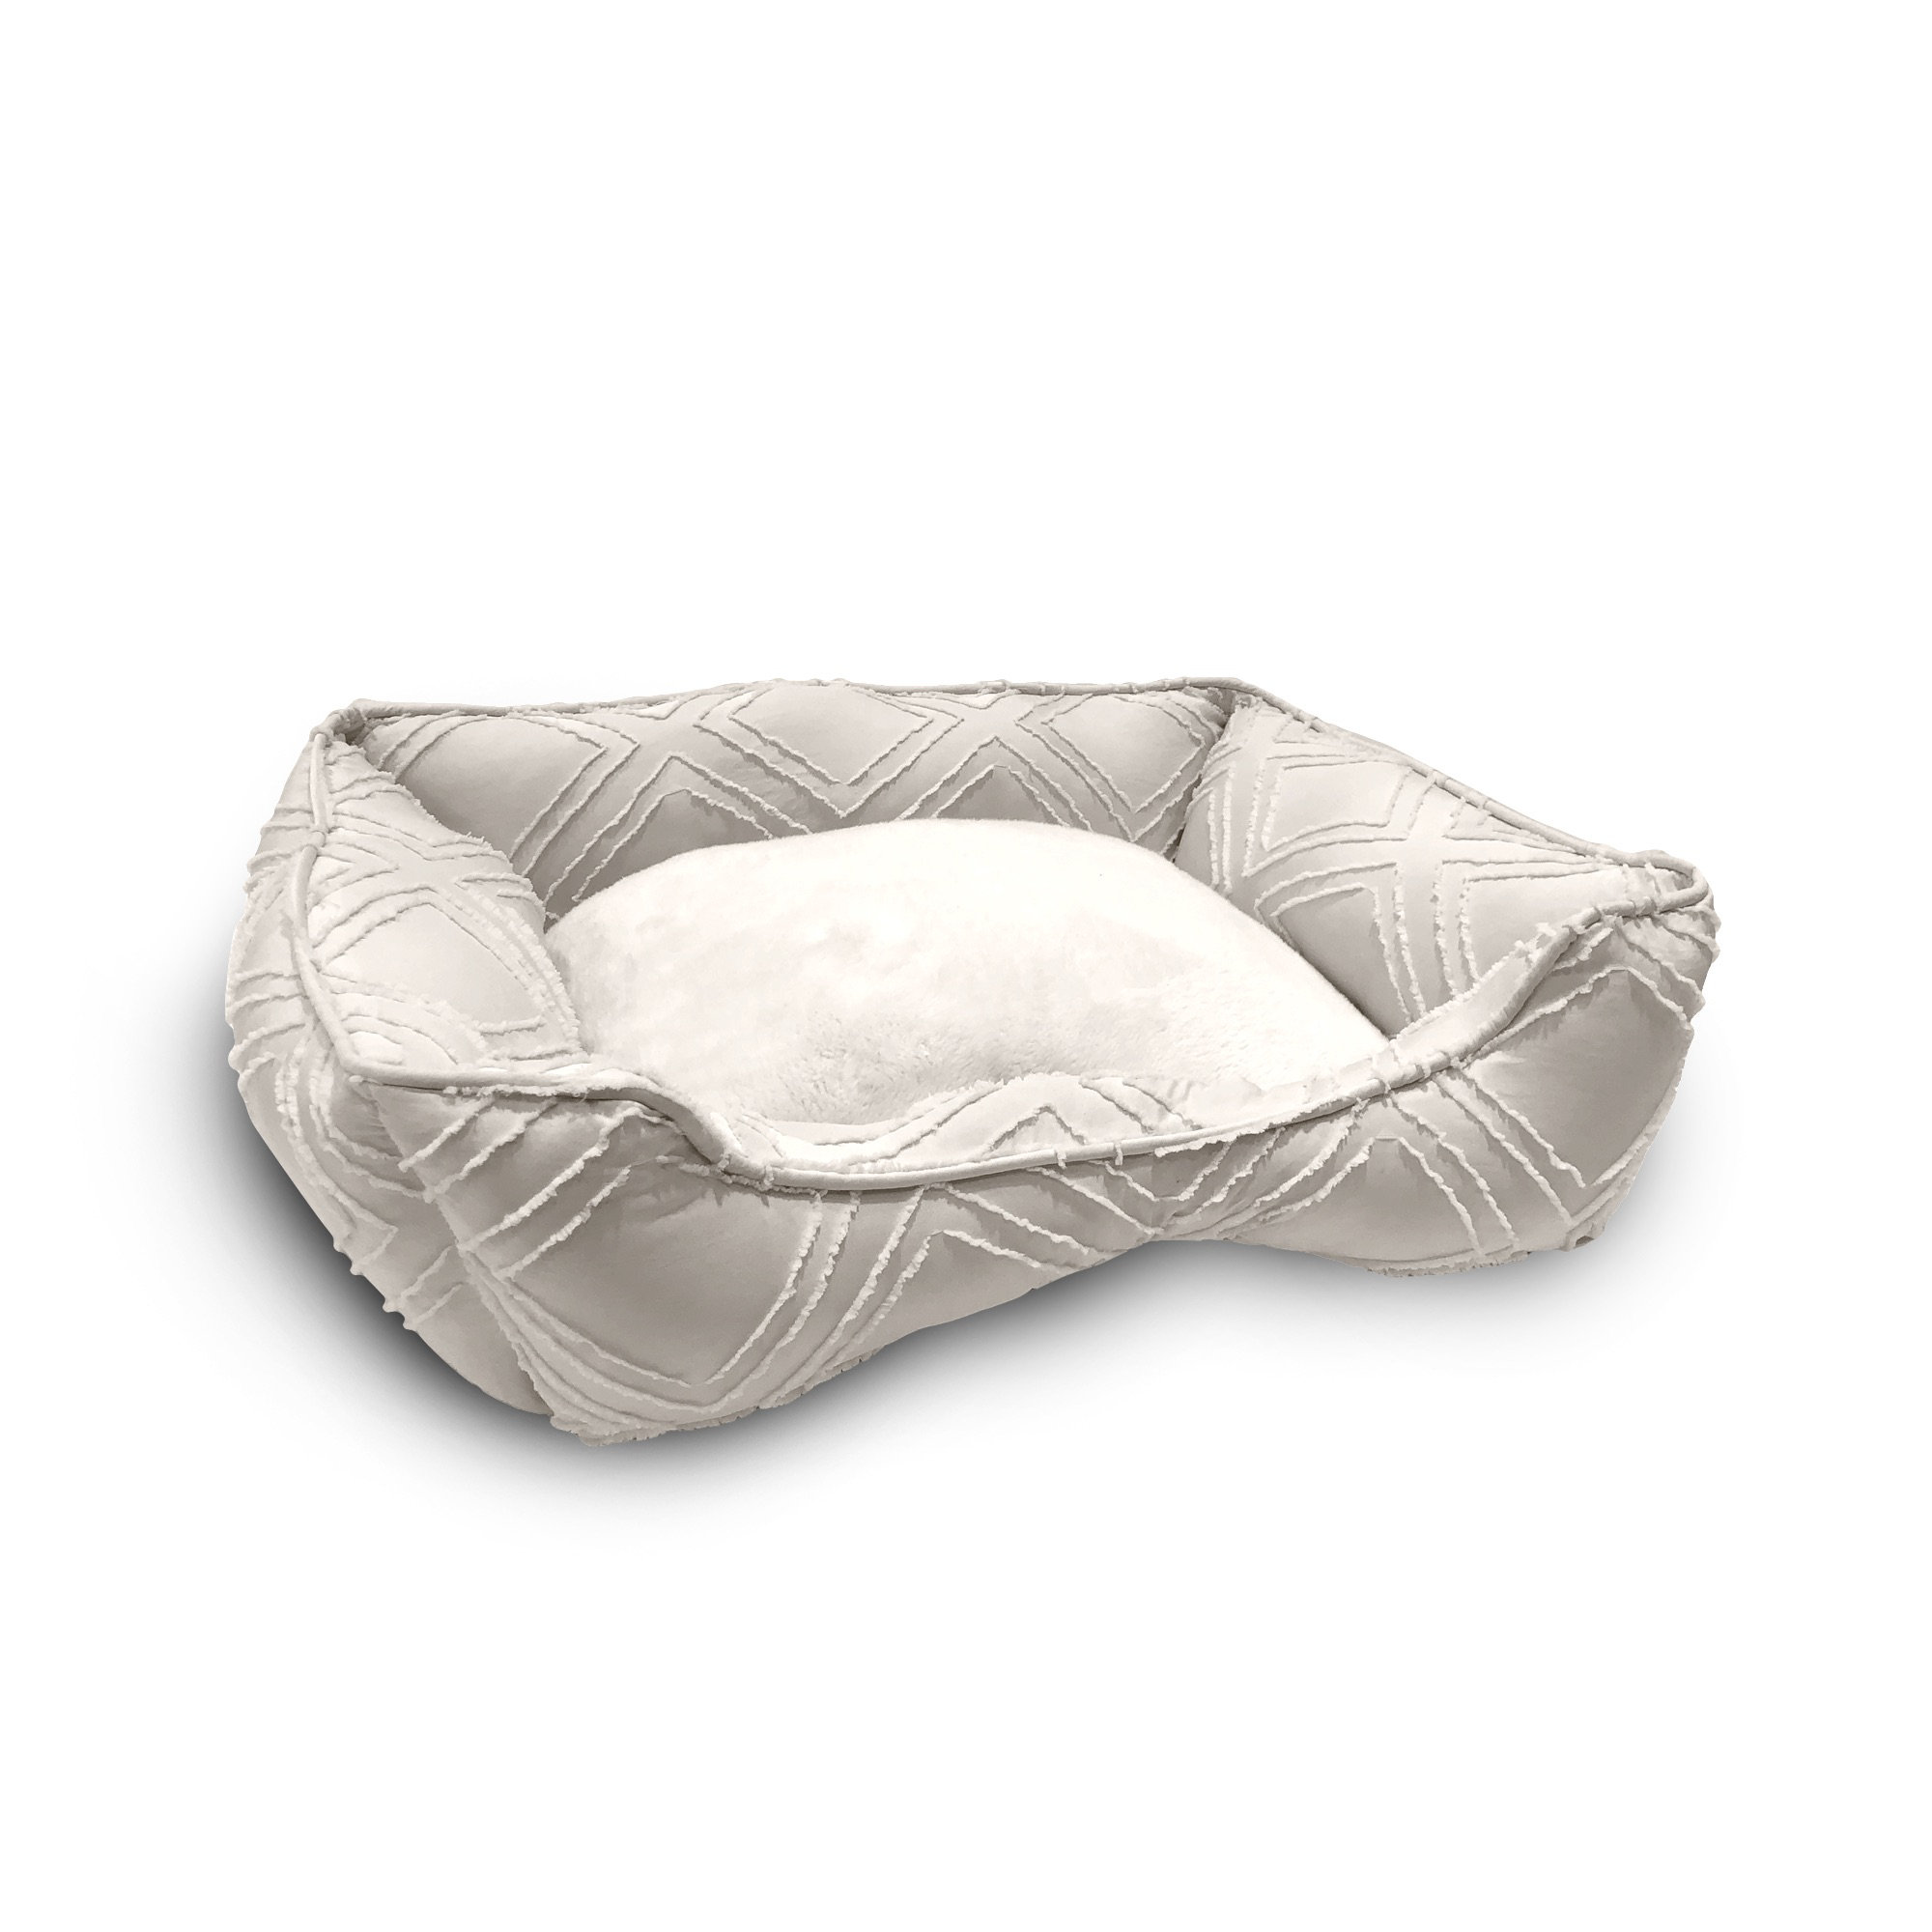 Pamper your furry friend with cozy cat bed and blanket